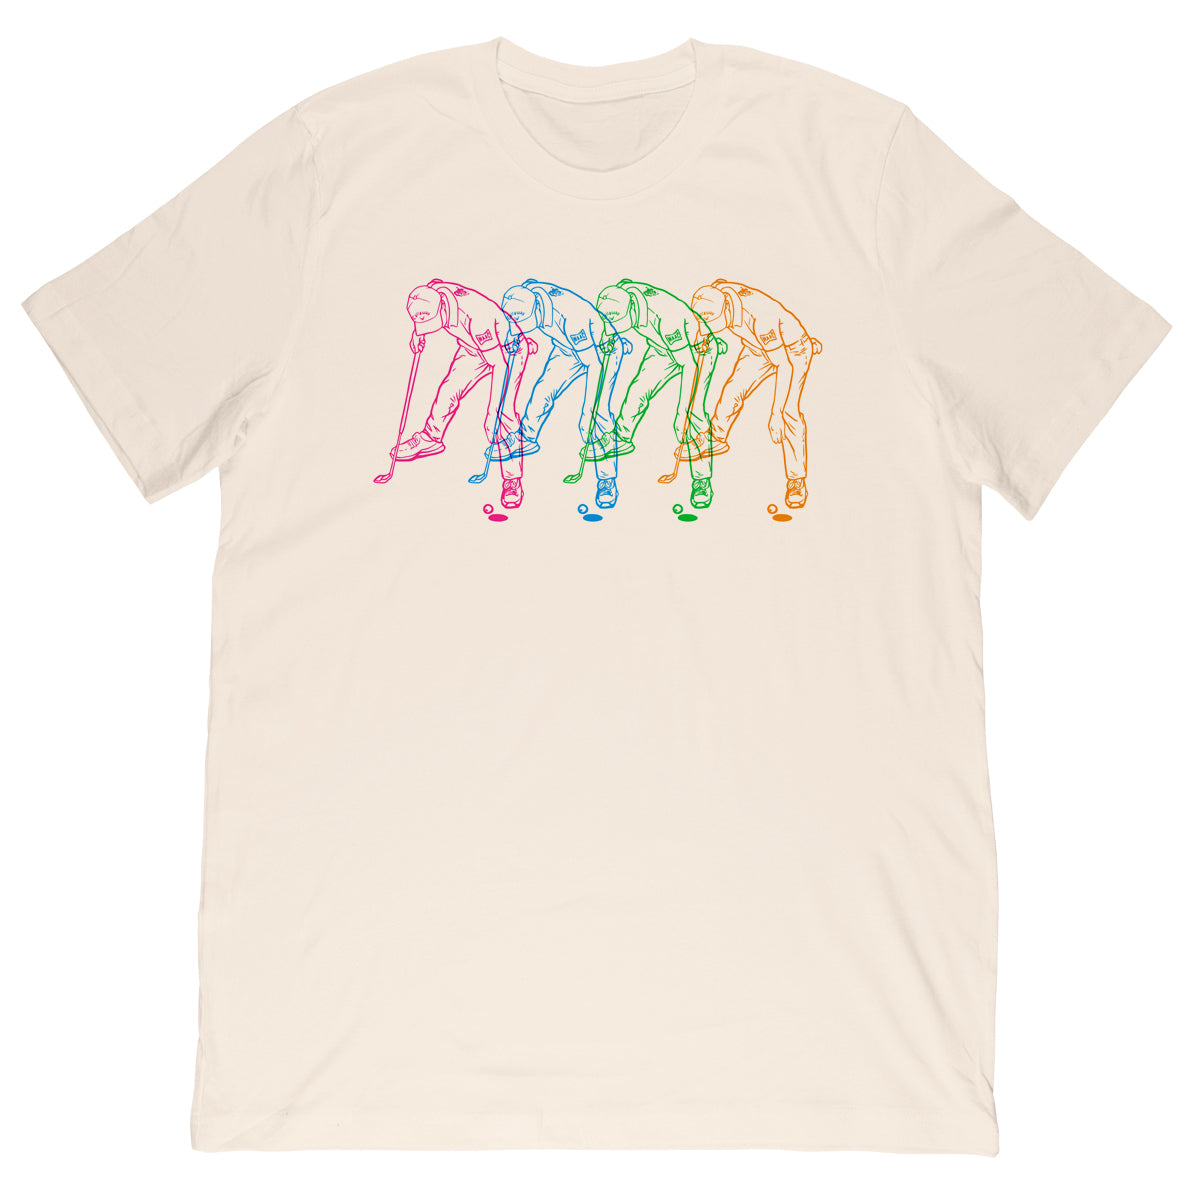 Kevin Na - Official Spectrum Tee